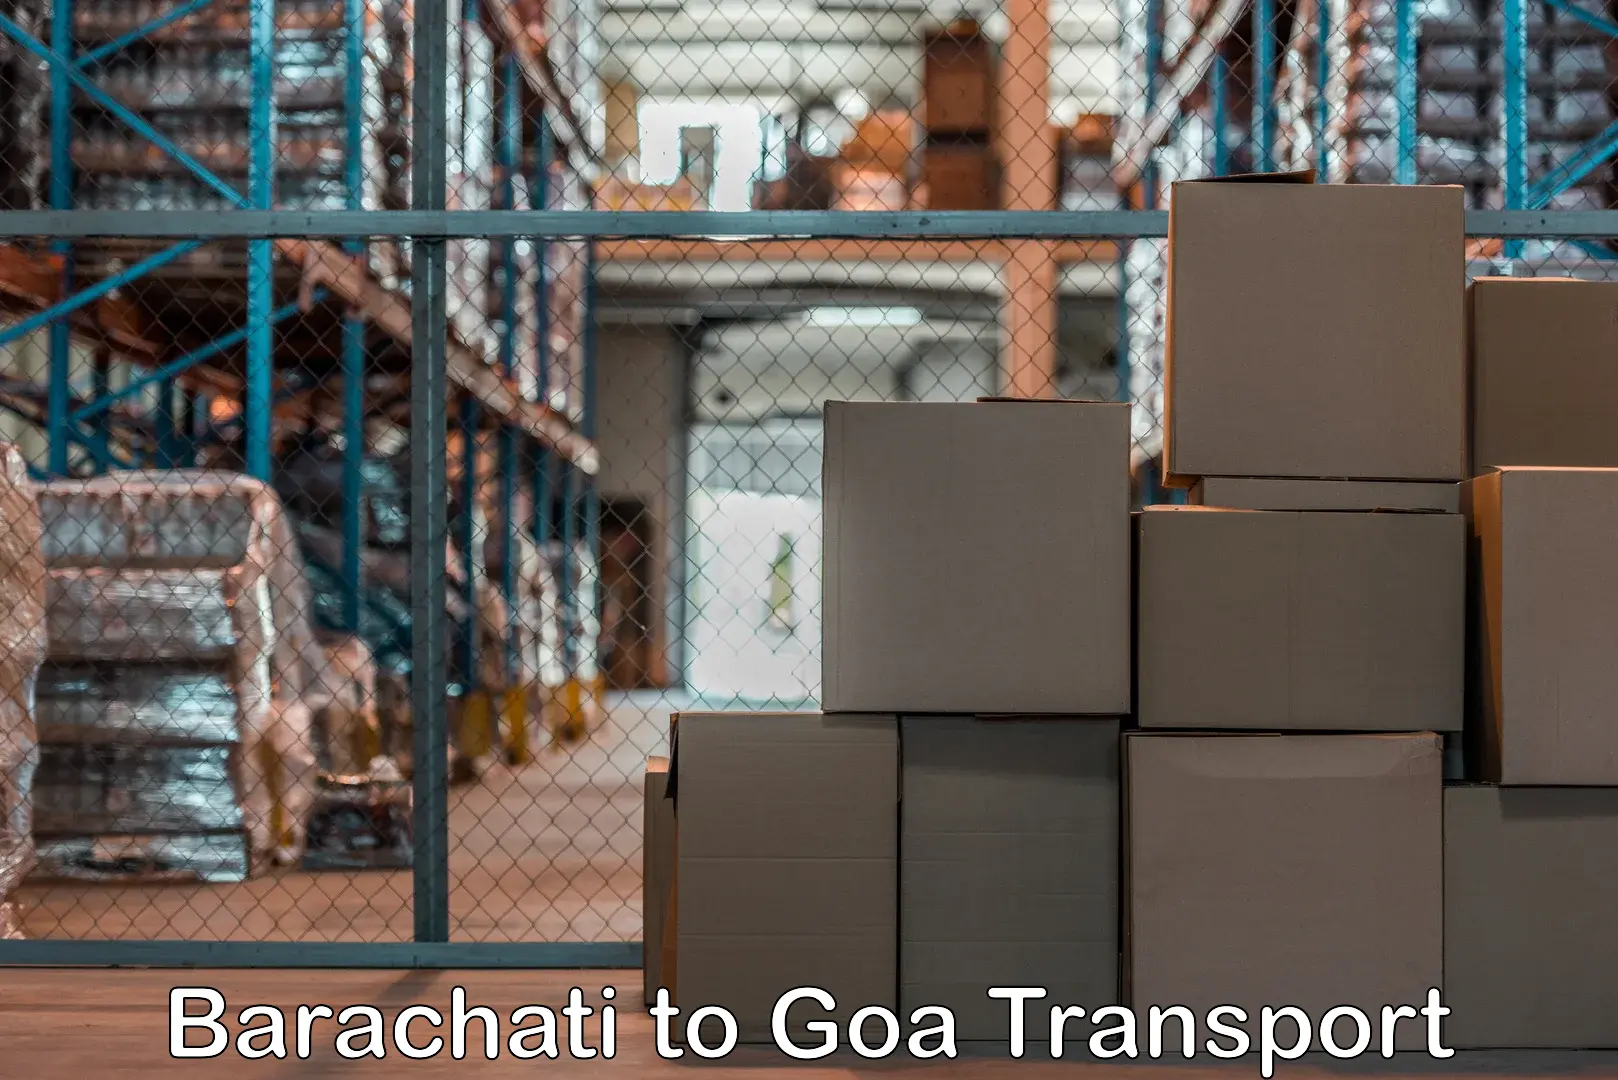 Transport bike from one state to another Barachati to Goa University